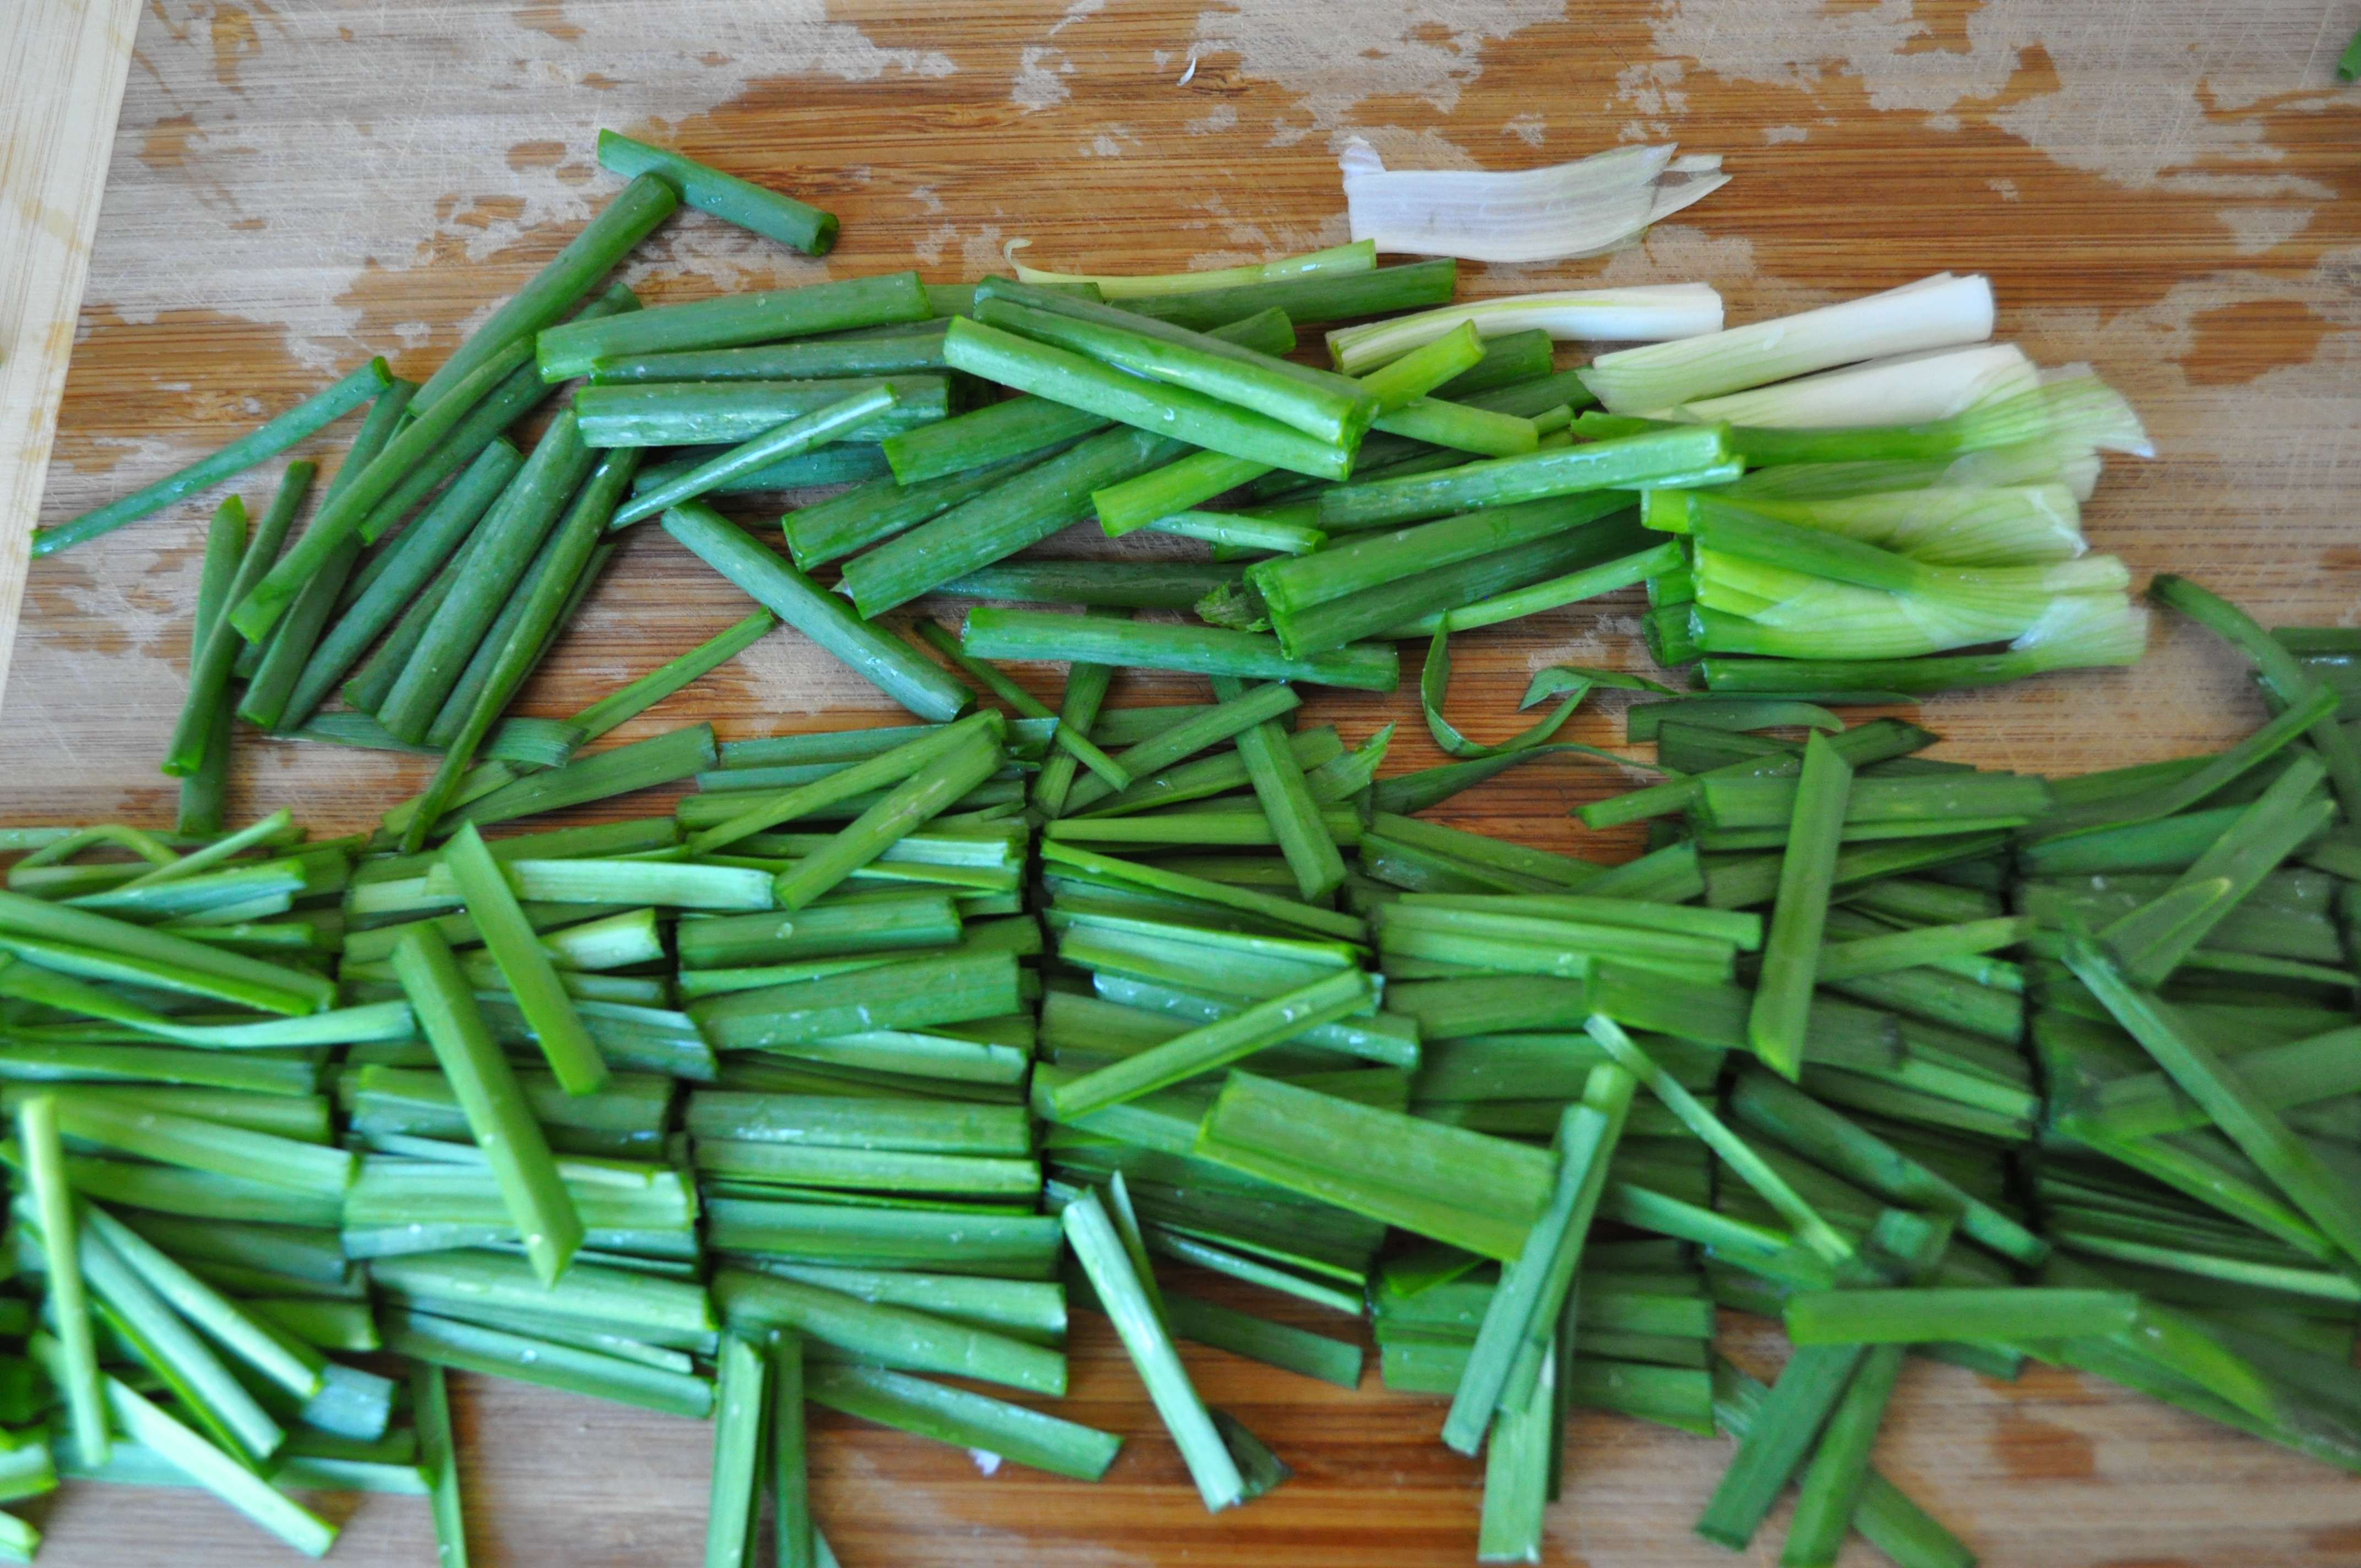 green onions and chives cut into lengths on cutting board